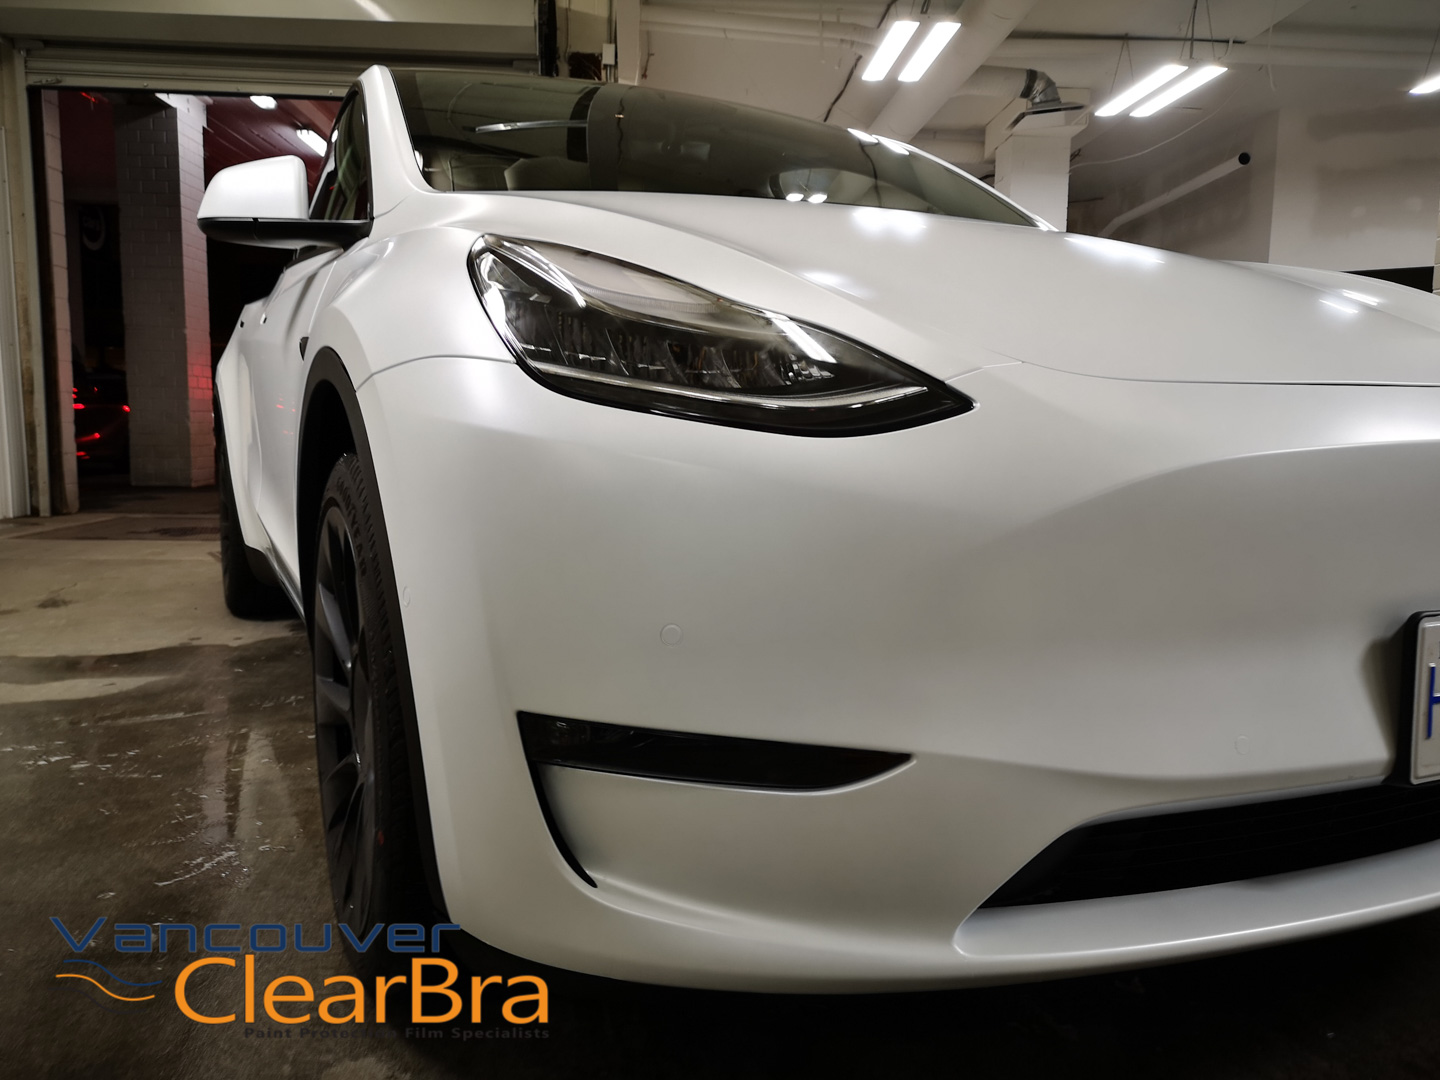 Vancouver Tesla Xpel Stealth - Vancouver ClearBra